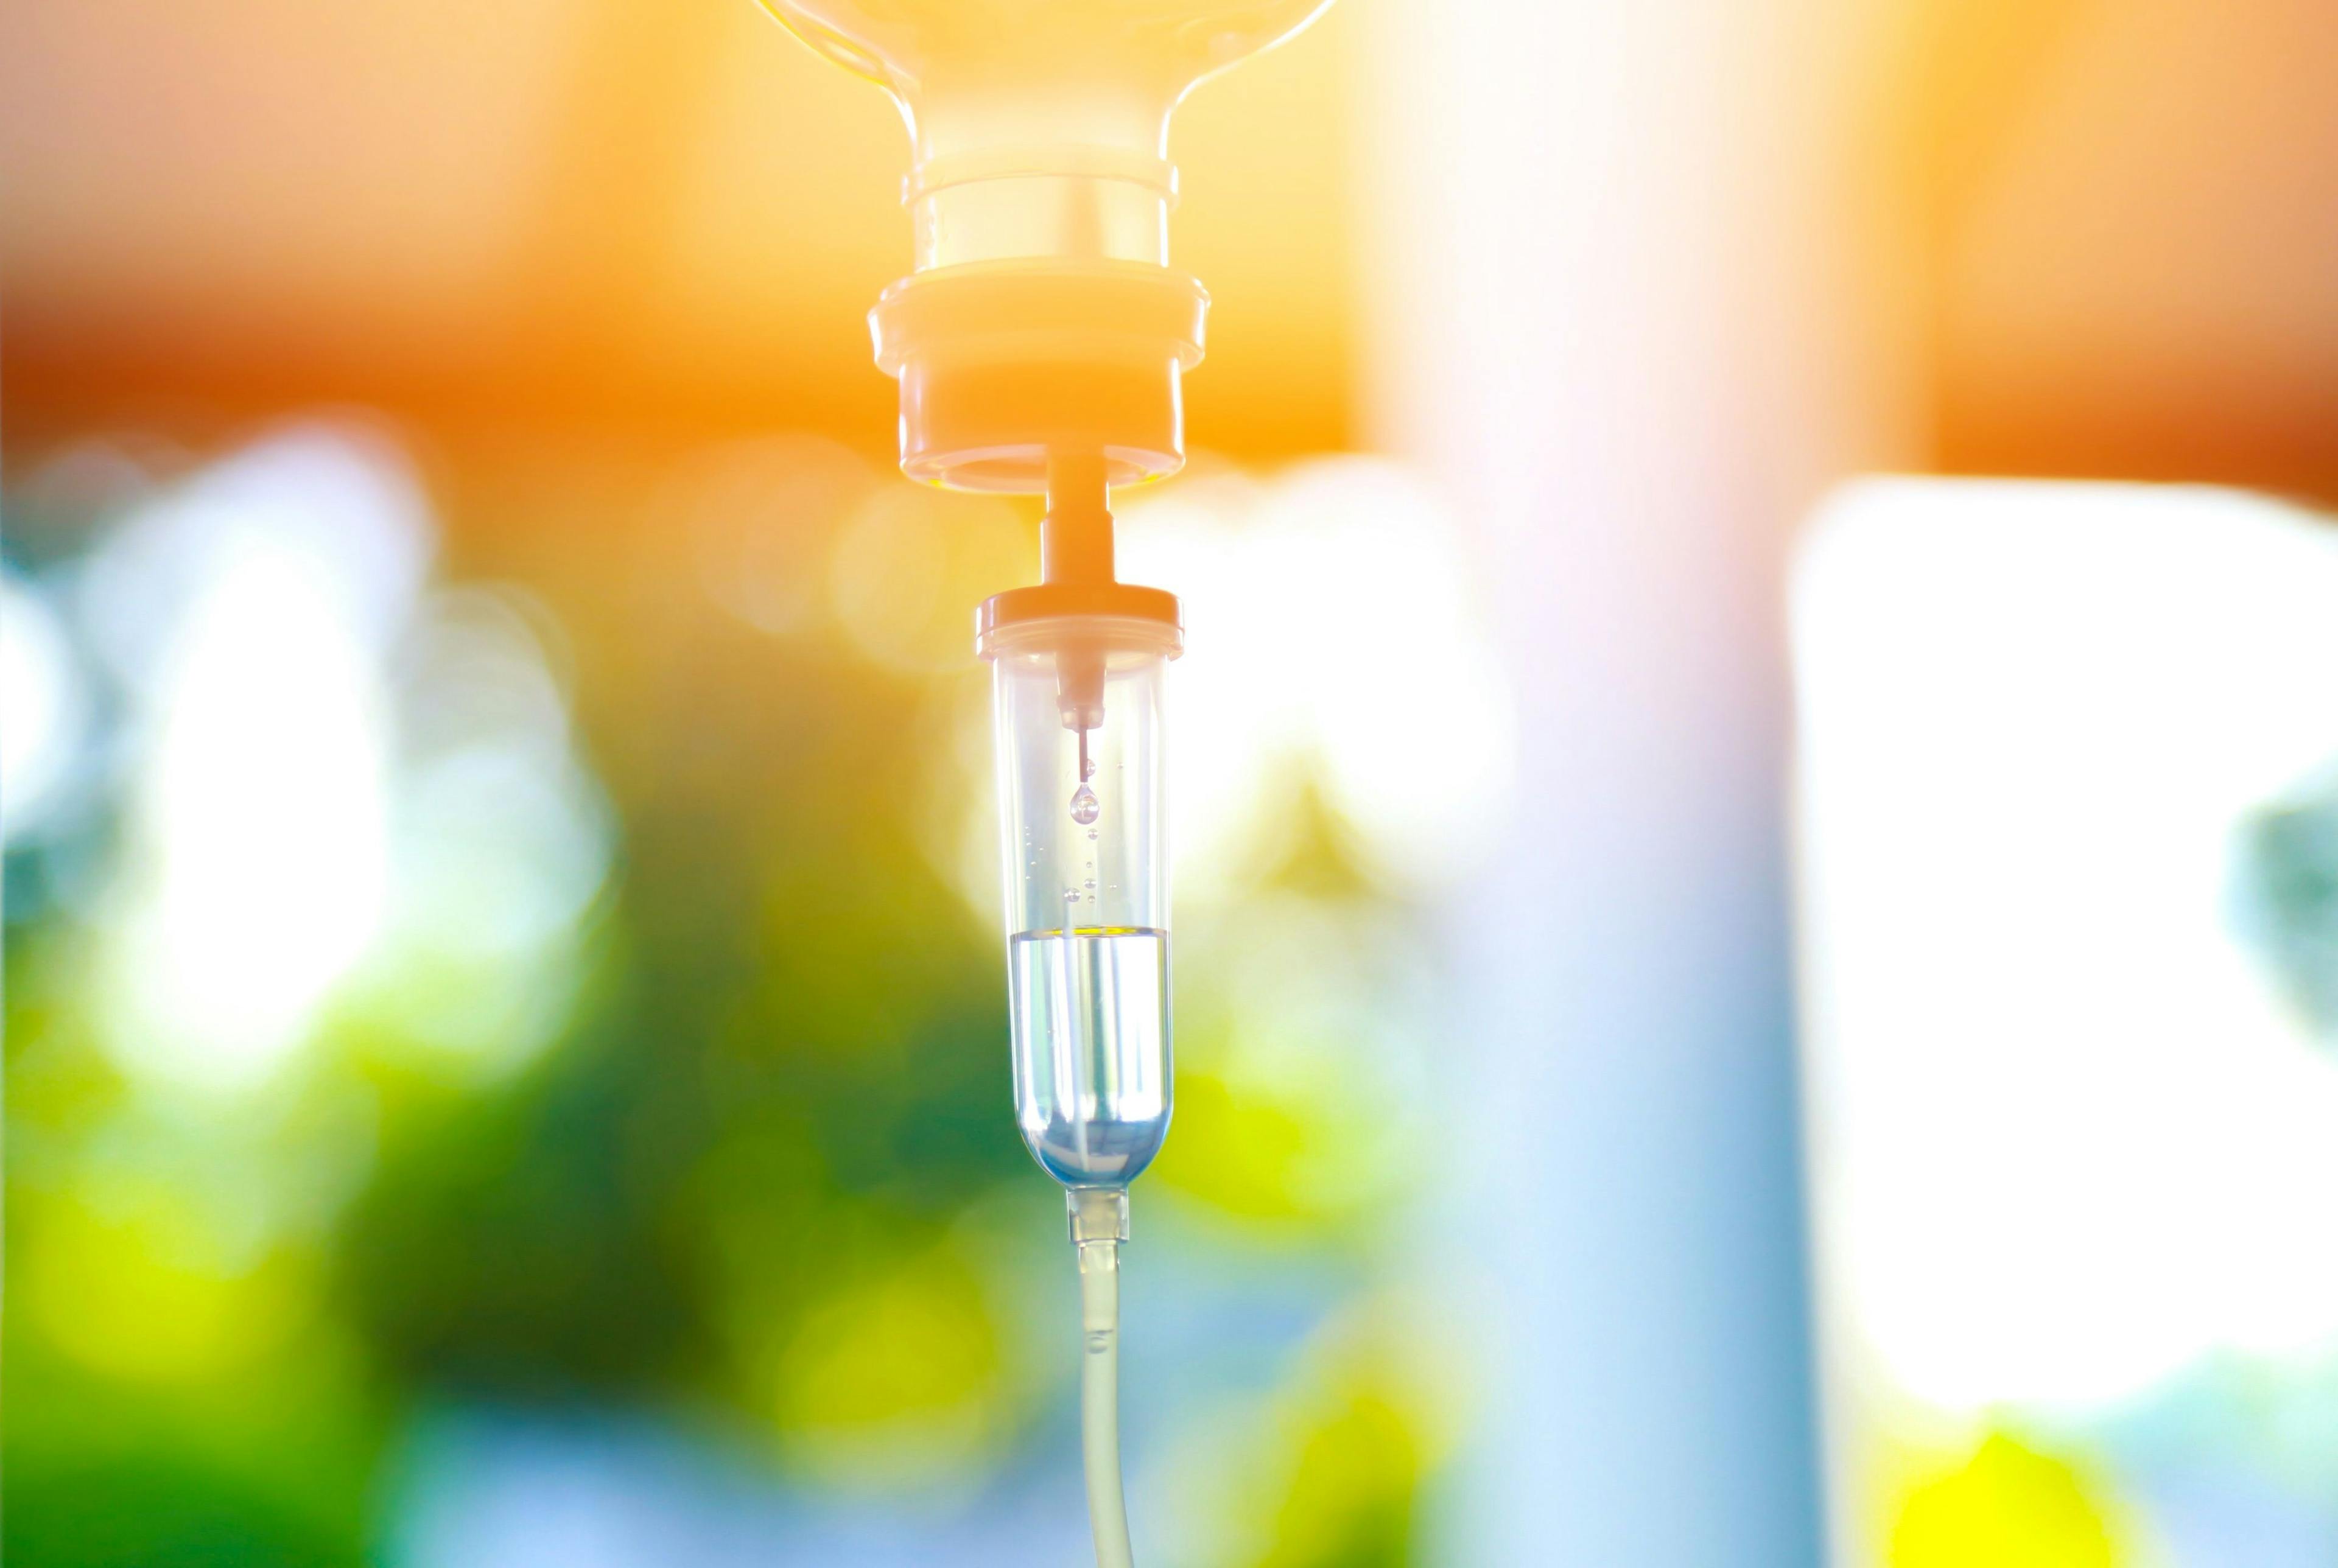 Intravenous fluid for infusion / Trsakaoe - stock.adobe.com